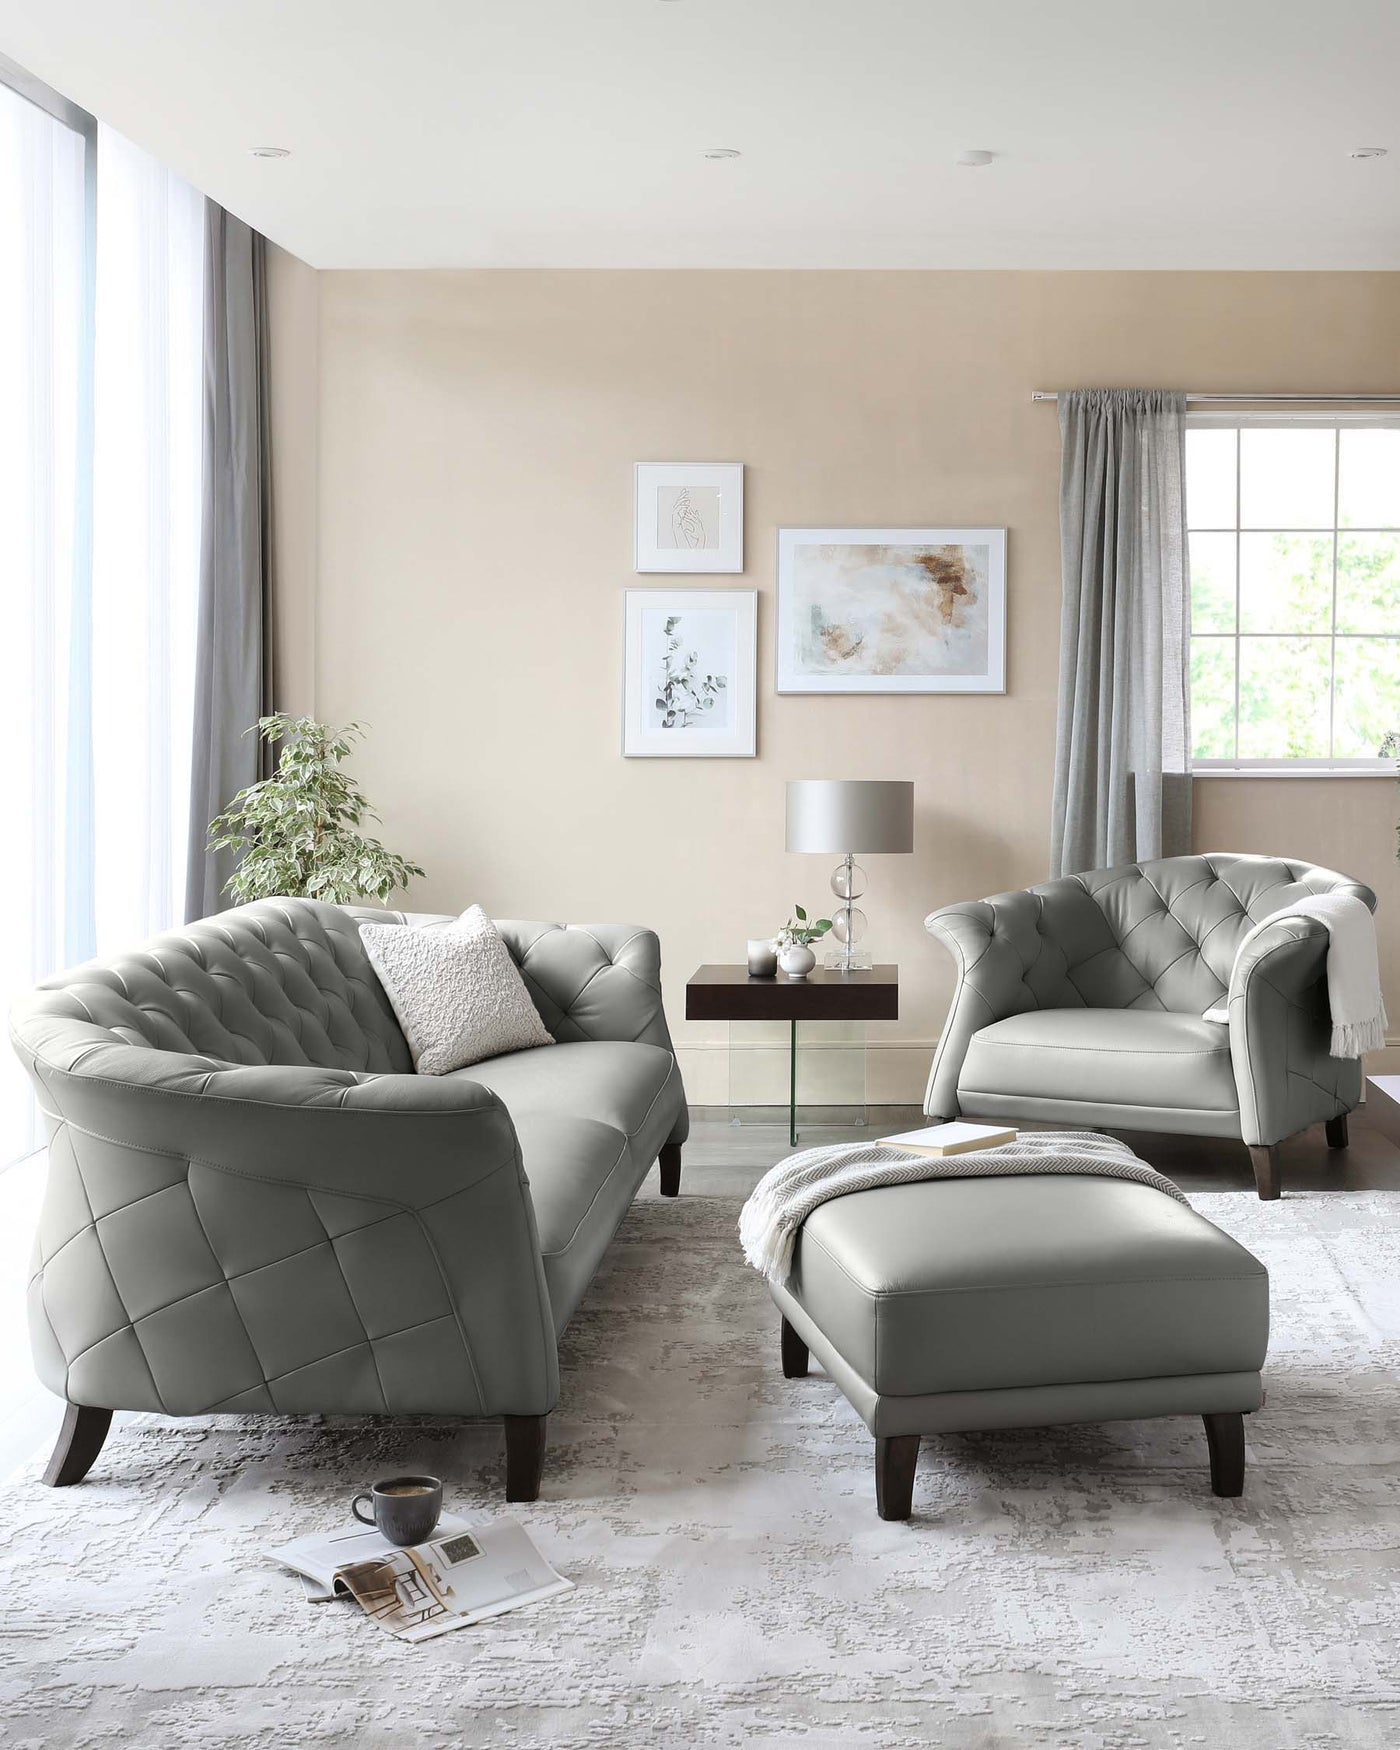 Elegant living room set featuring a tufted grey sofa with matching armchair and ottoman, all with dark wooden legs. A sleek wooden side table with a lower shelf holds a table lamp and decorative items, positioned beside the armchair.